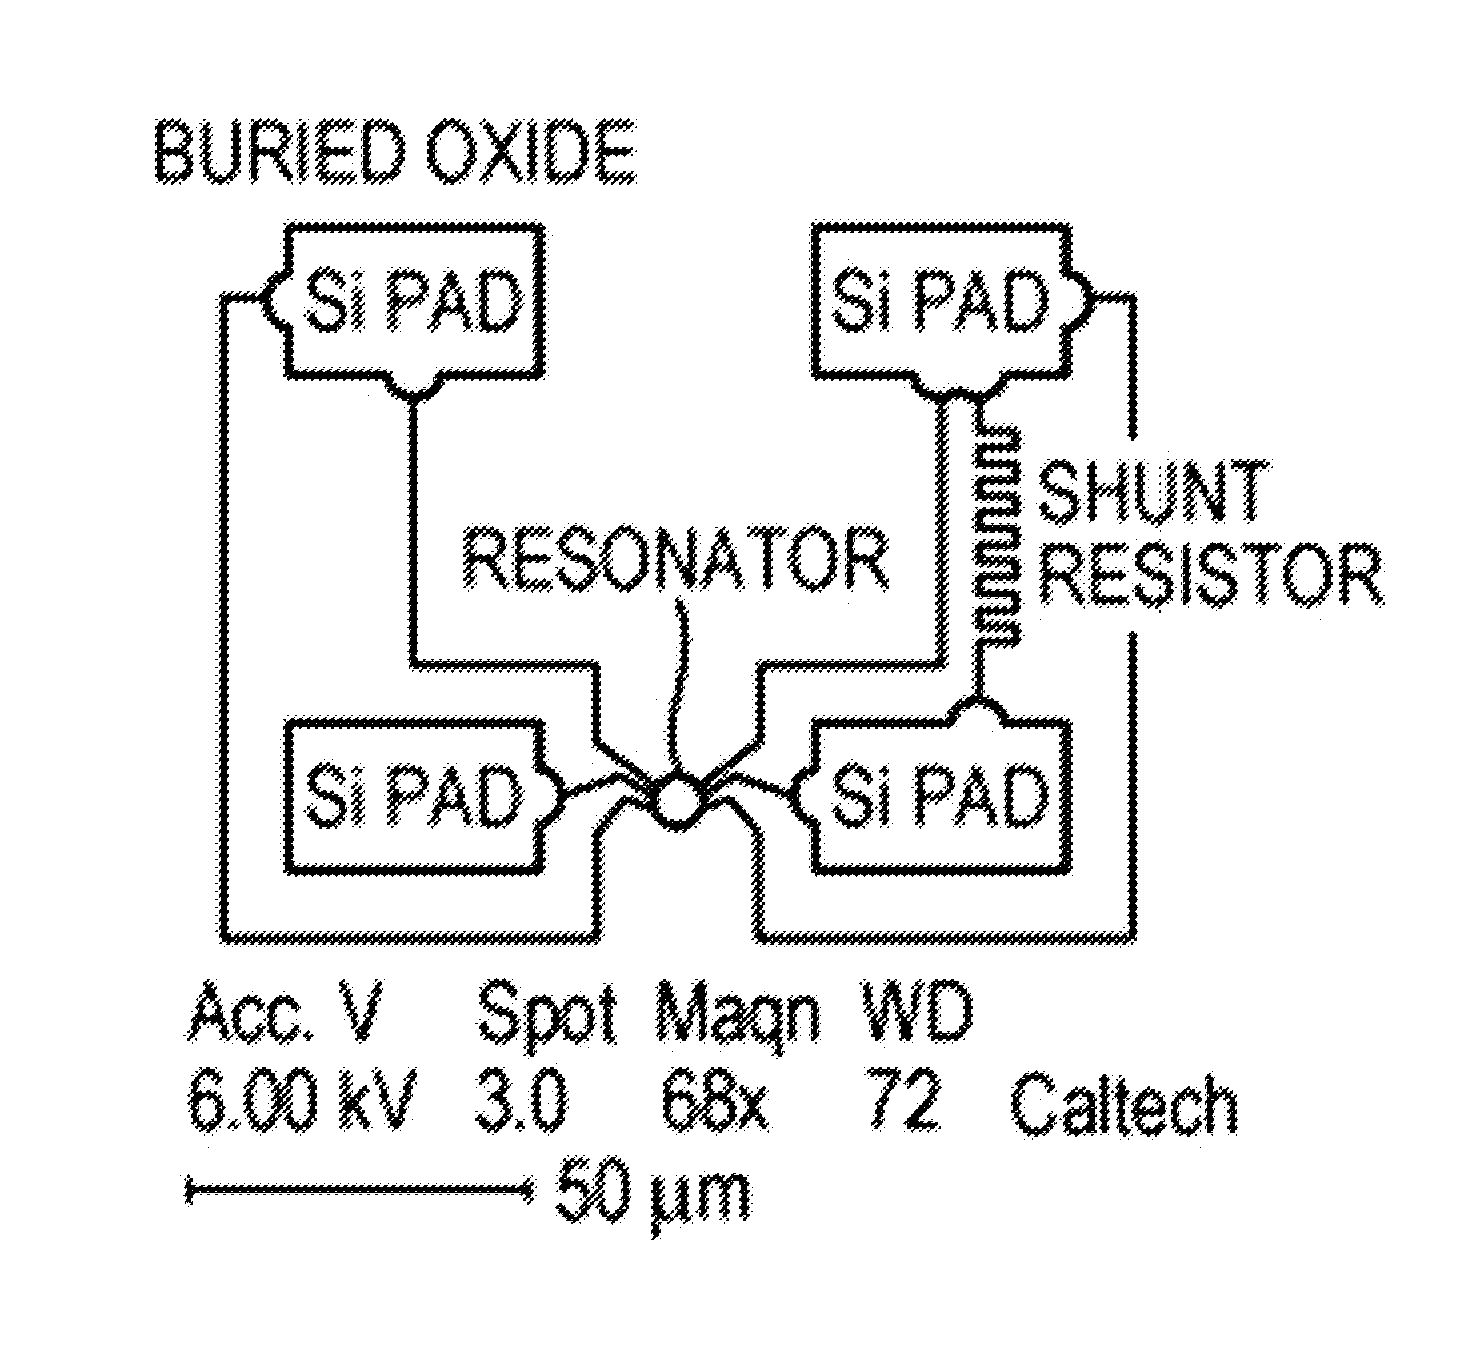 Beam generation and steering with integrated optical circuits for light detection and ranging